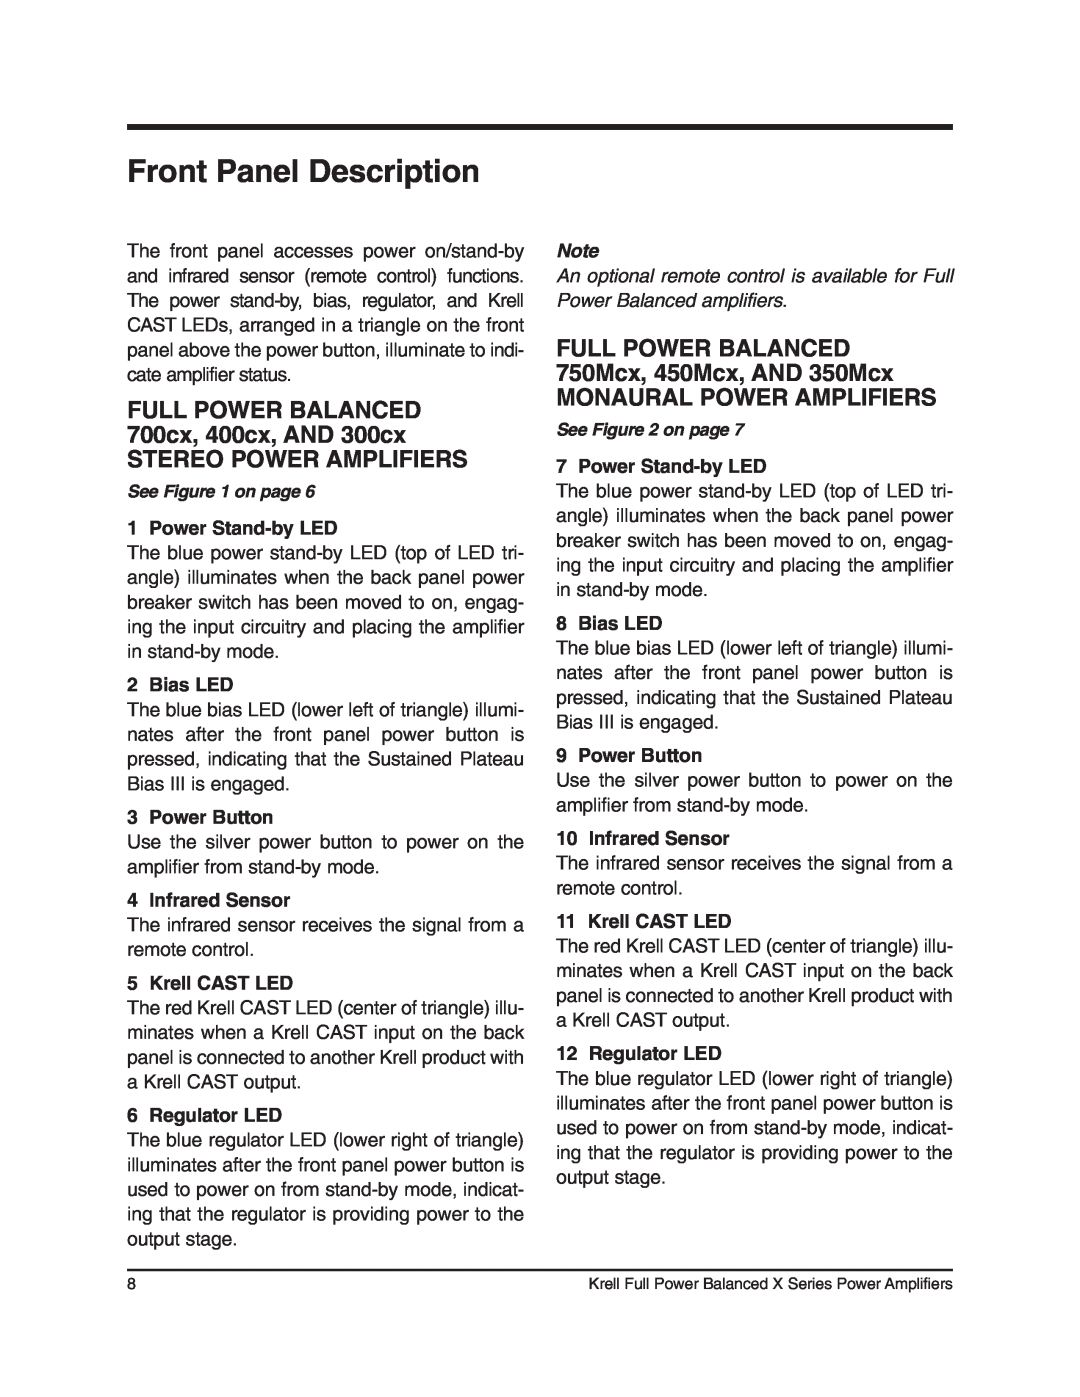 Krell Industries 350Mcx Front Panel Description, FULL POWER BALANCED 700cx, 400cx, AND 300cx, Stereo Power Amplifiers 